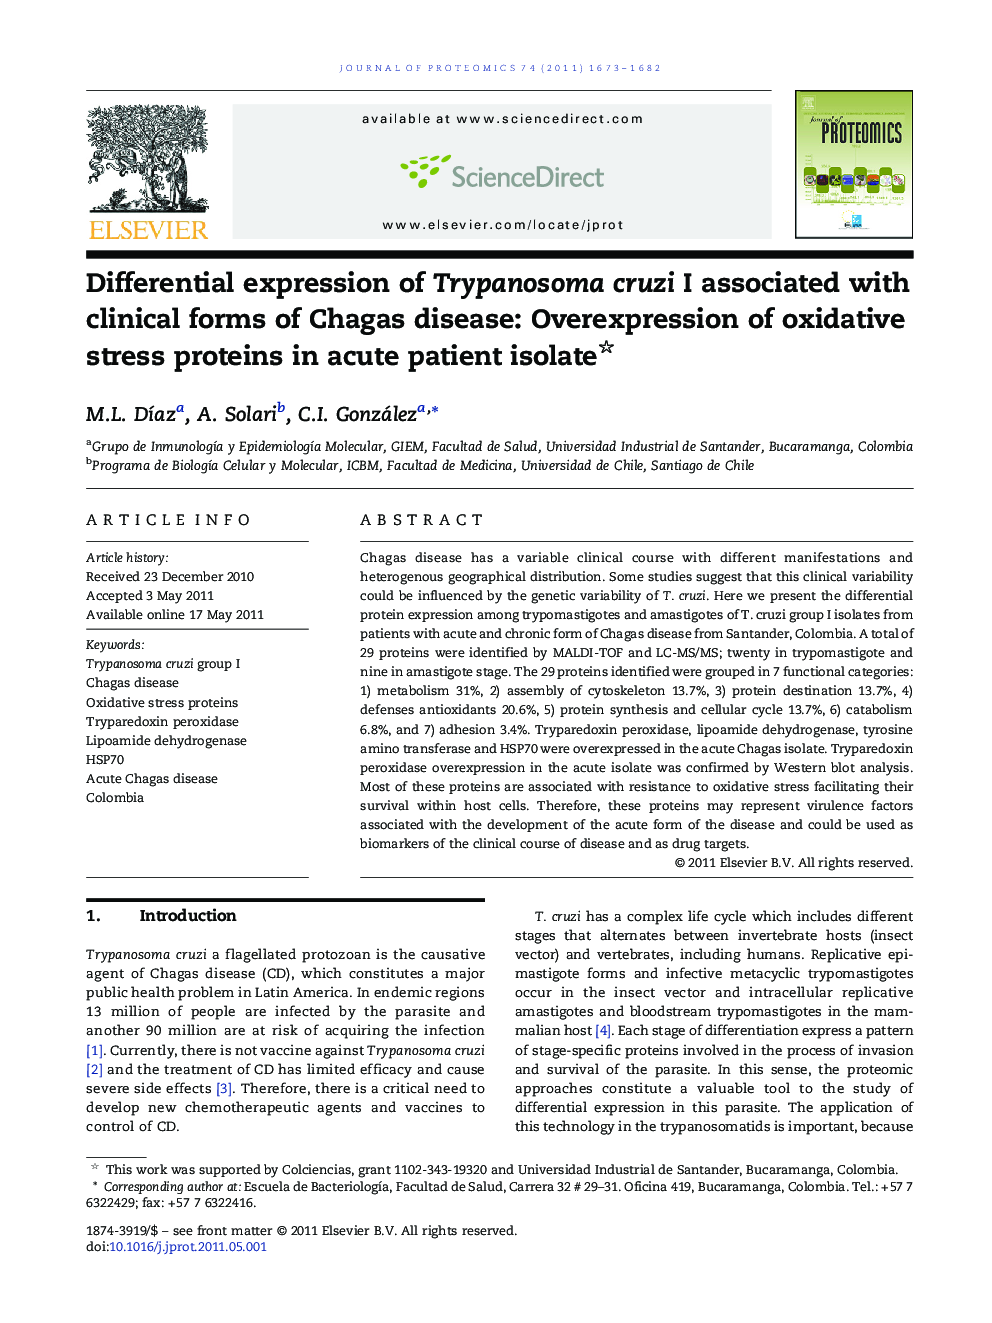 Differential expression of Trypanosoma cruzi I associated with clinical forms of Chagas disease: Overexpression of oxidative stress proteins in acute patient isolate 